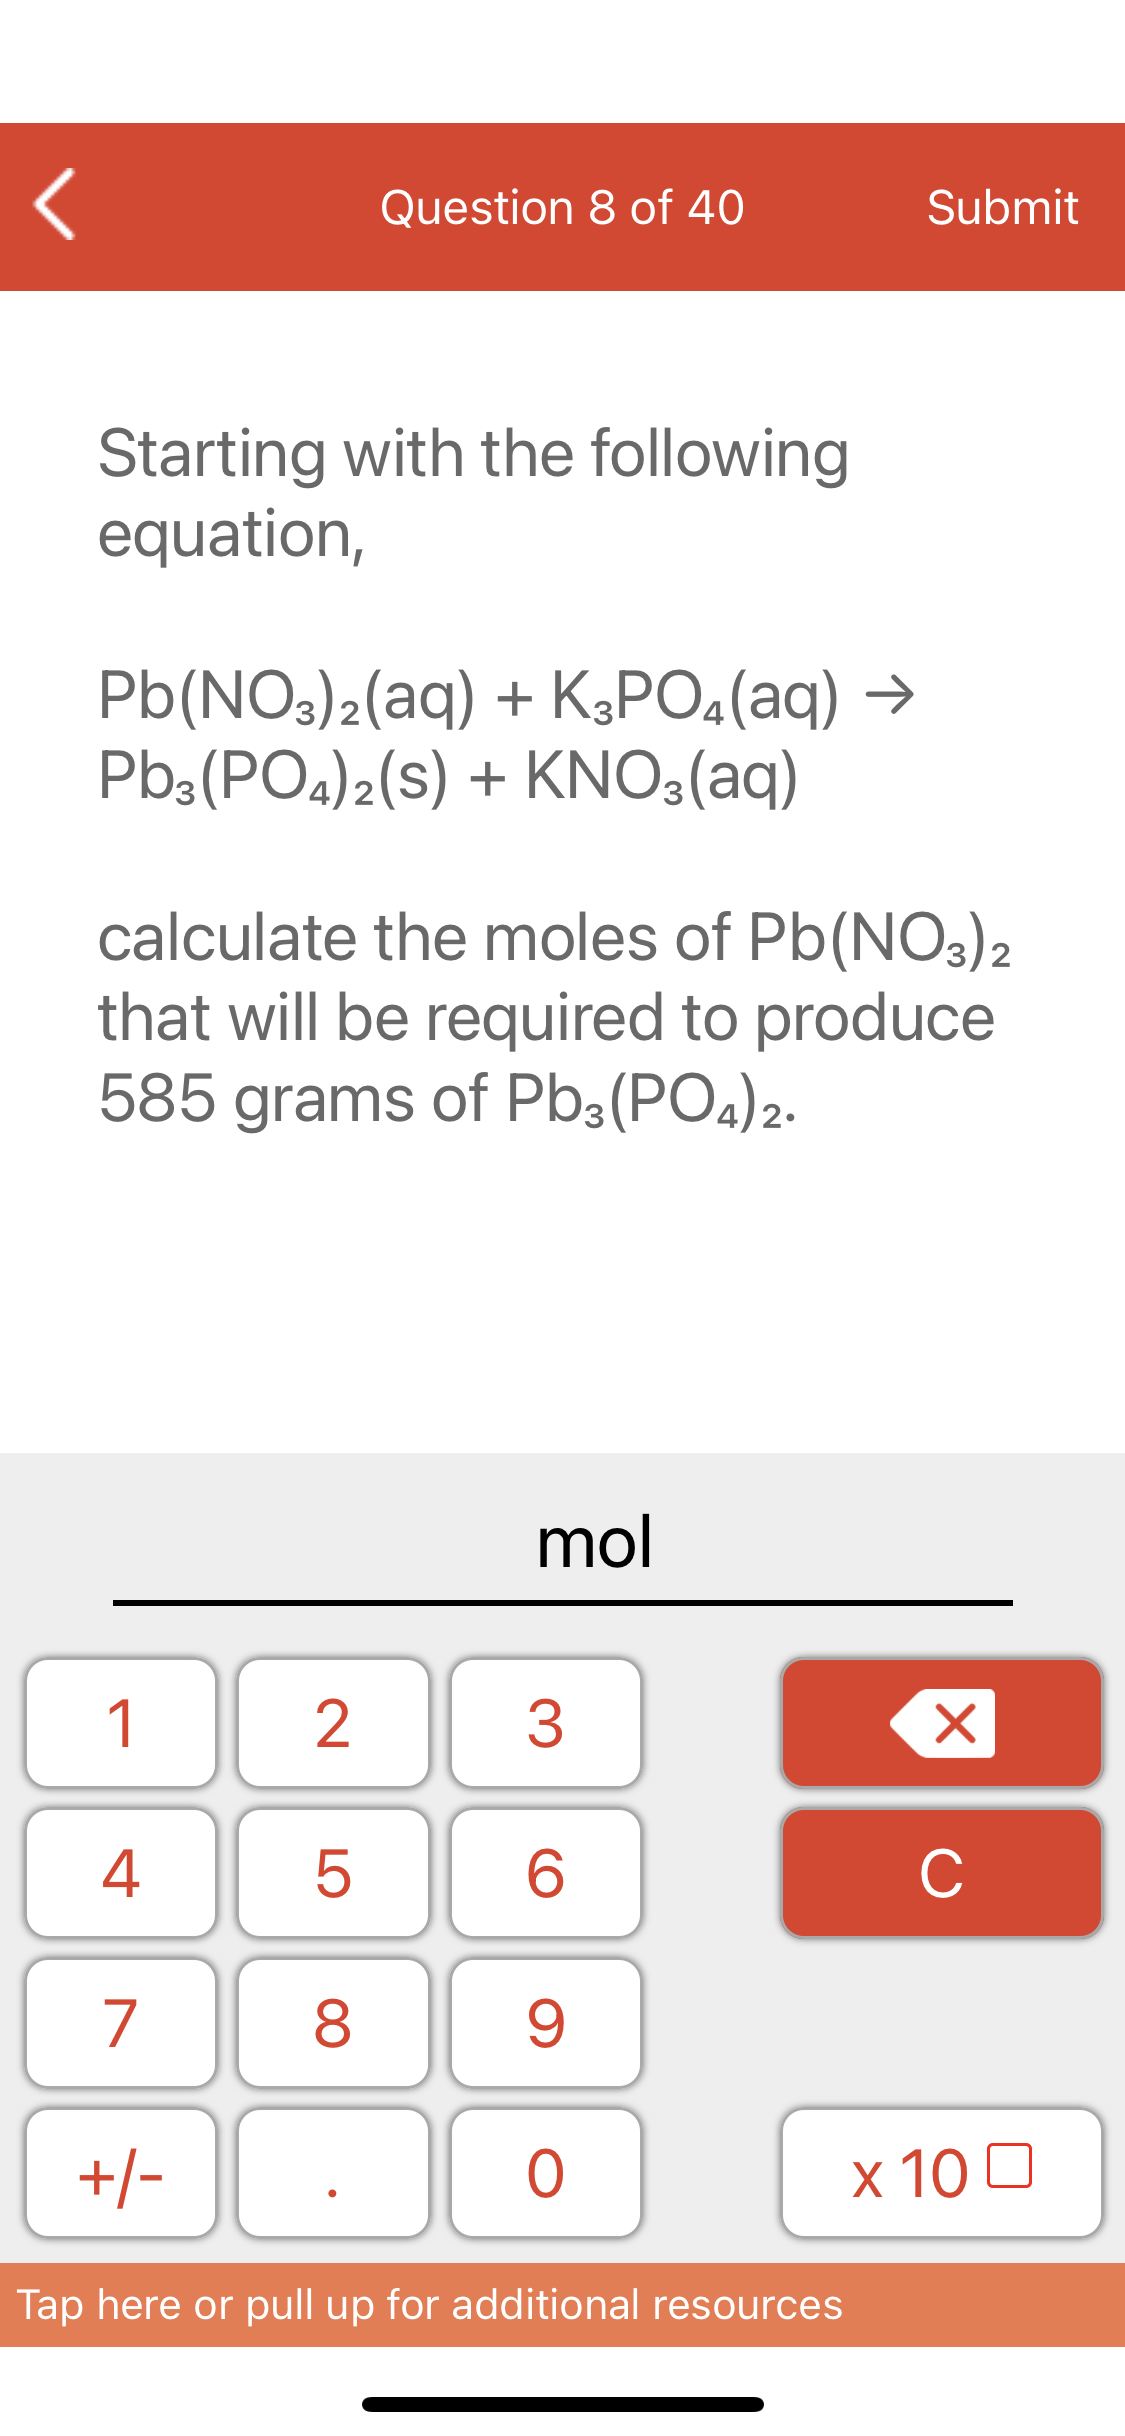 Question 8 of 40
Submit
Starting with the following
equation,
Pb(NO3)2(aq) + K3PO4(aq) →
Pb3(PO4)2(S) + KNO3(aq)
calculate the moles of Pb(NO3)2
that will be required to produce
585 grams of Pb3(PO4)2.
mol
1
3
4
C
7
9.
+/-
х 100
Tap here or pull up for additional resources
LO
00
